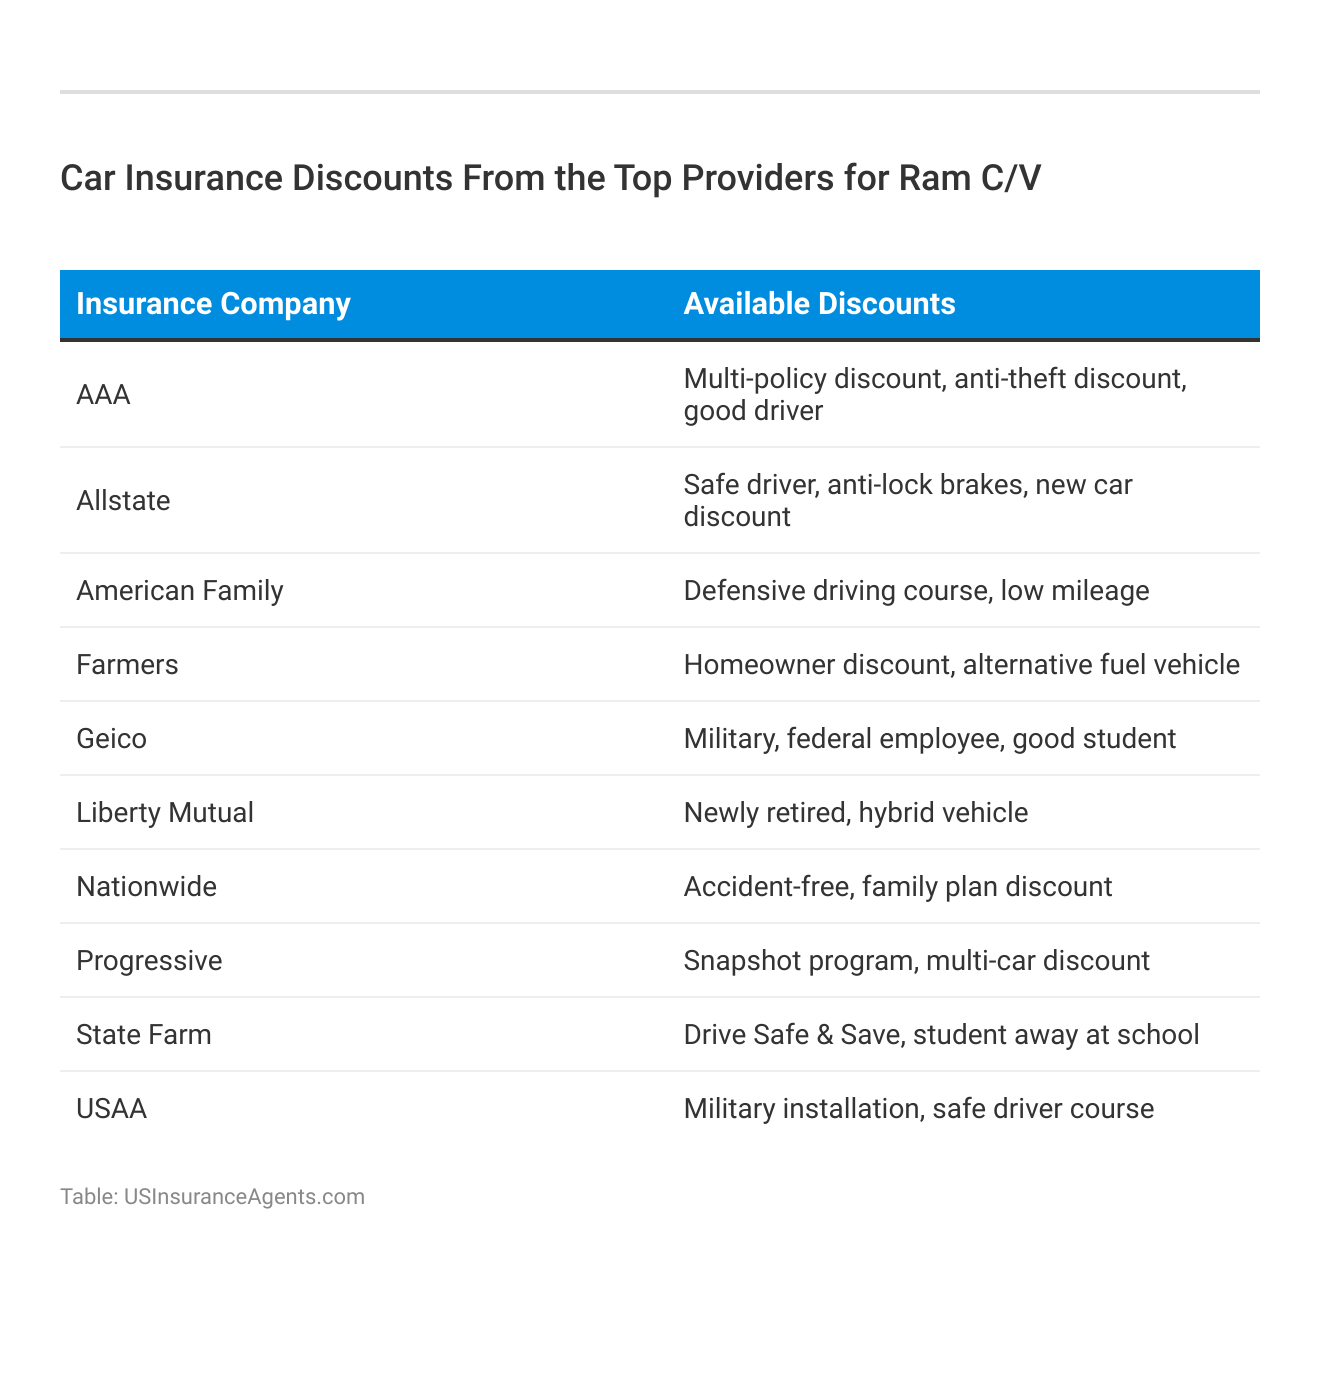 <h3>Car Insurance Discounts From the Top Providers for Ram C/V</h3>